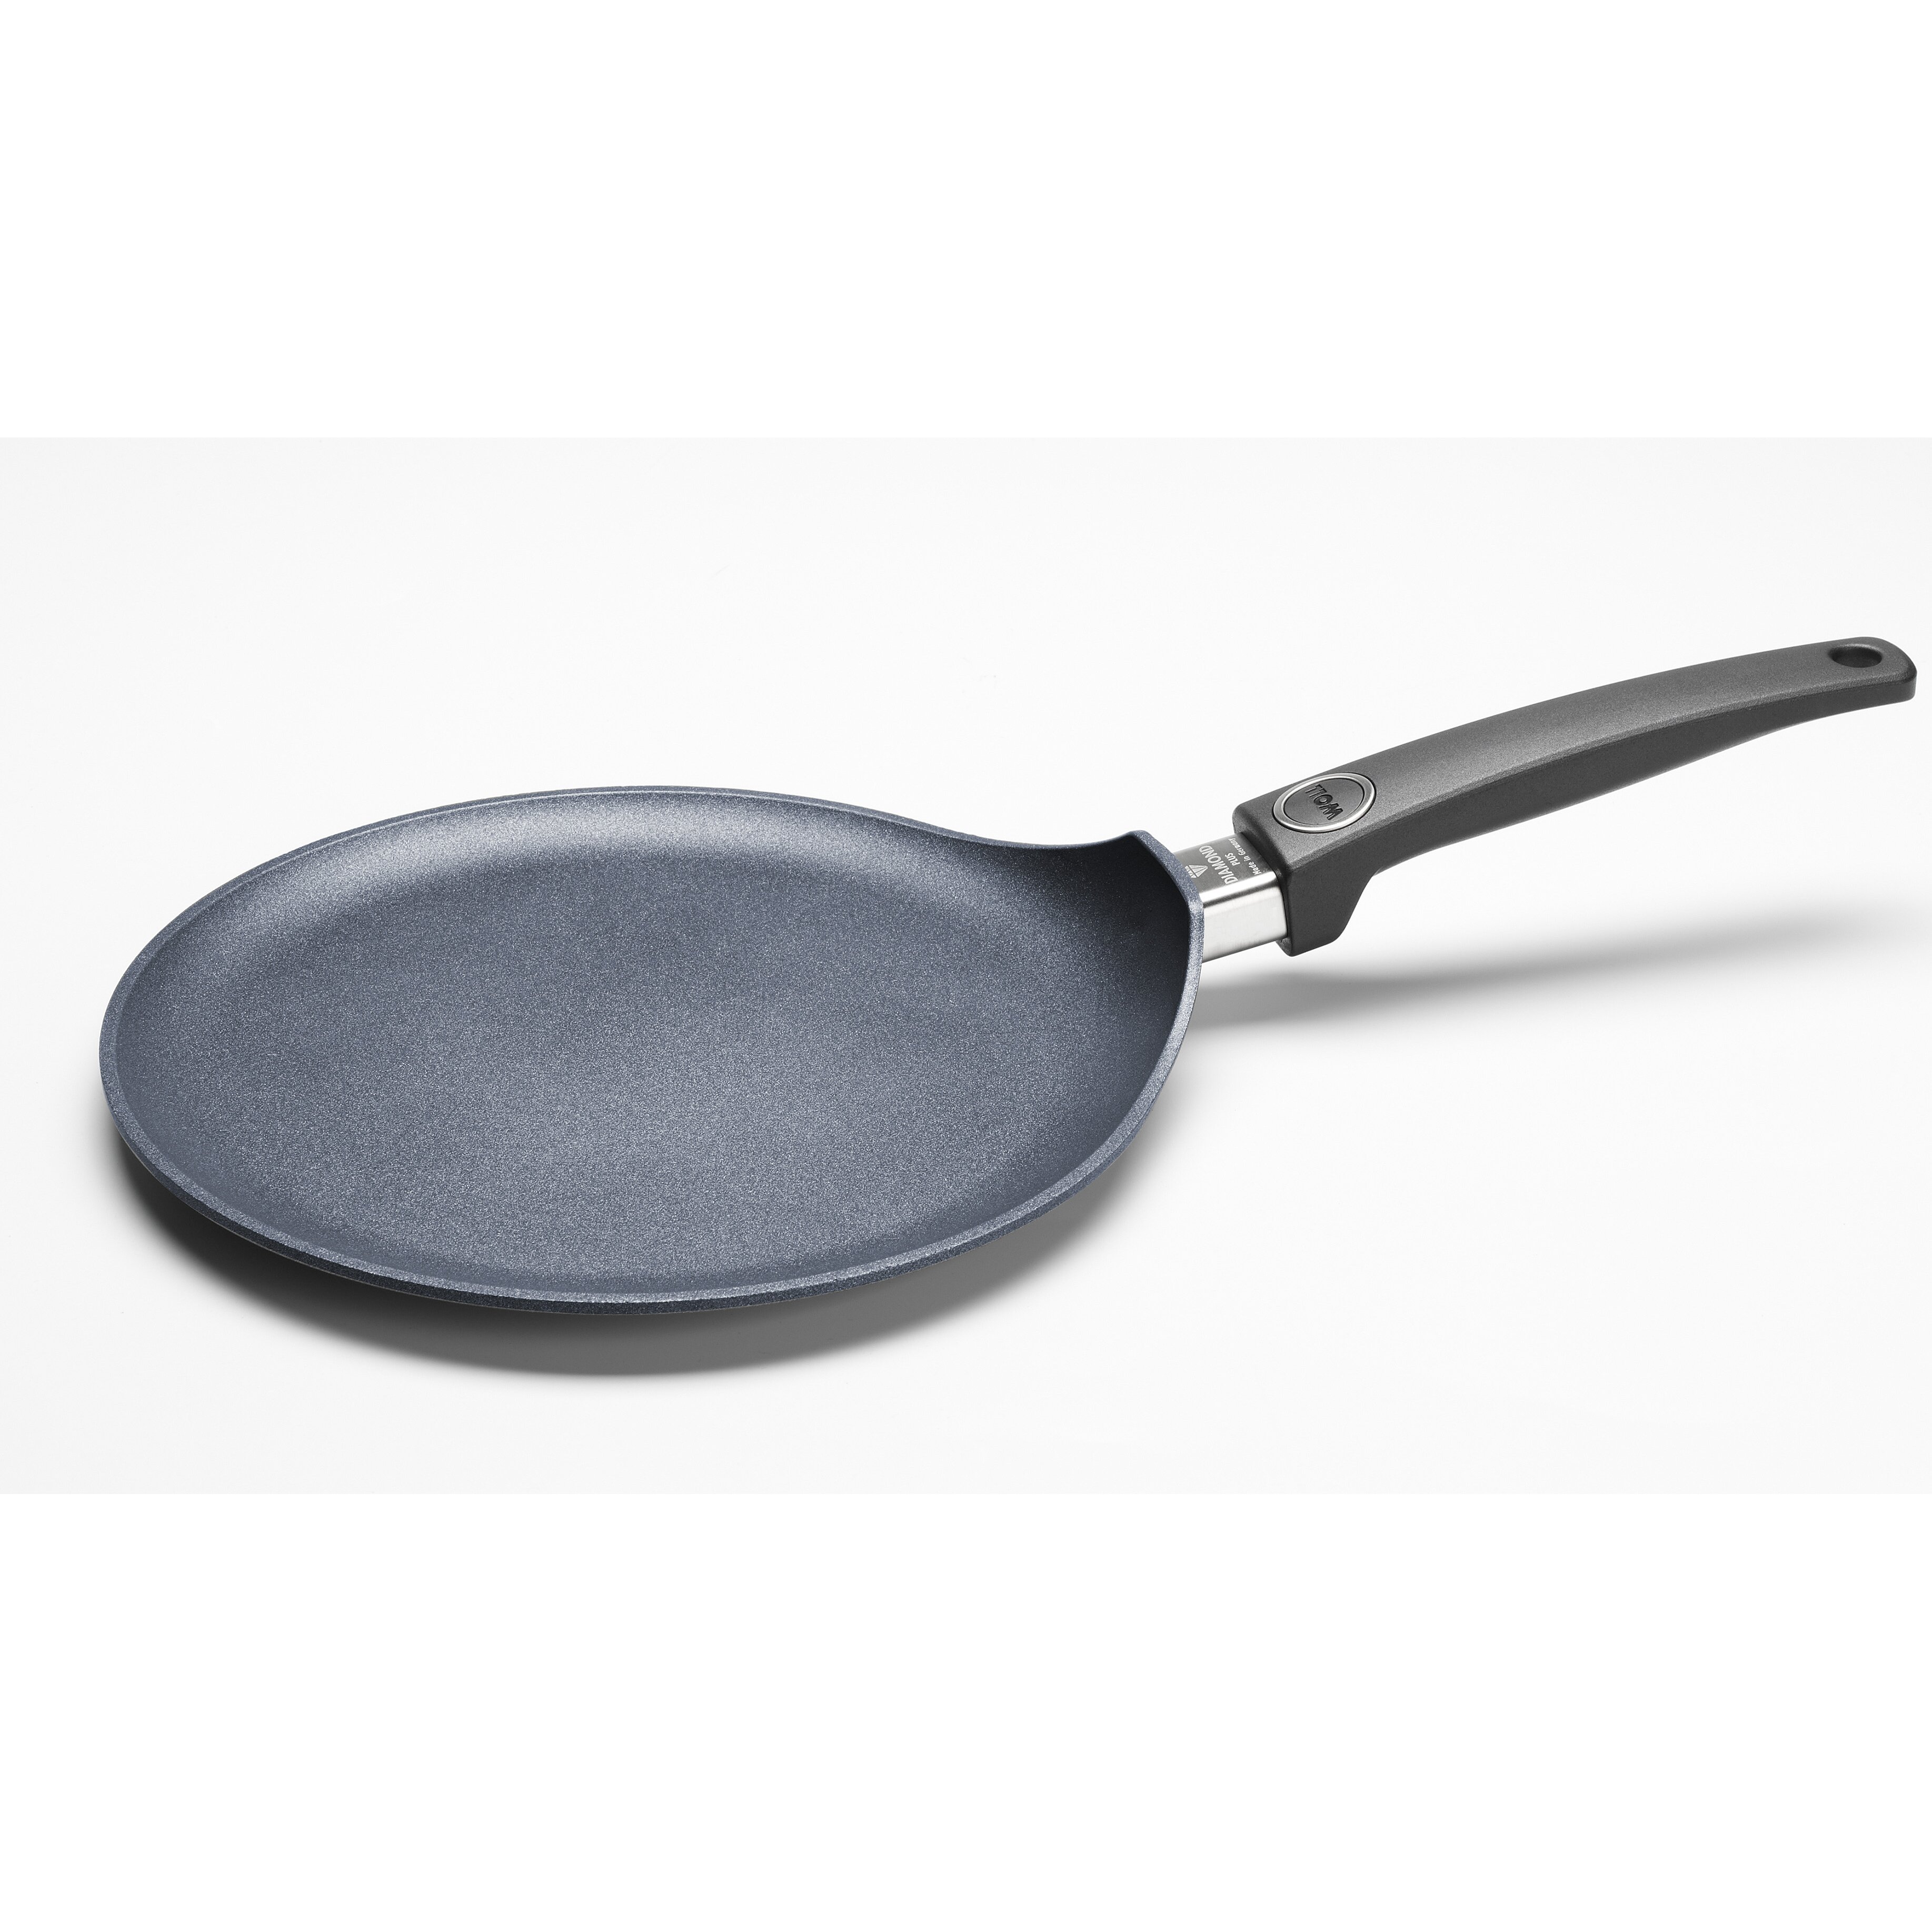 Diamond Plus Non Stick Crepe Pan by Woll Cookware